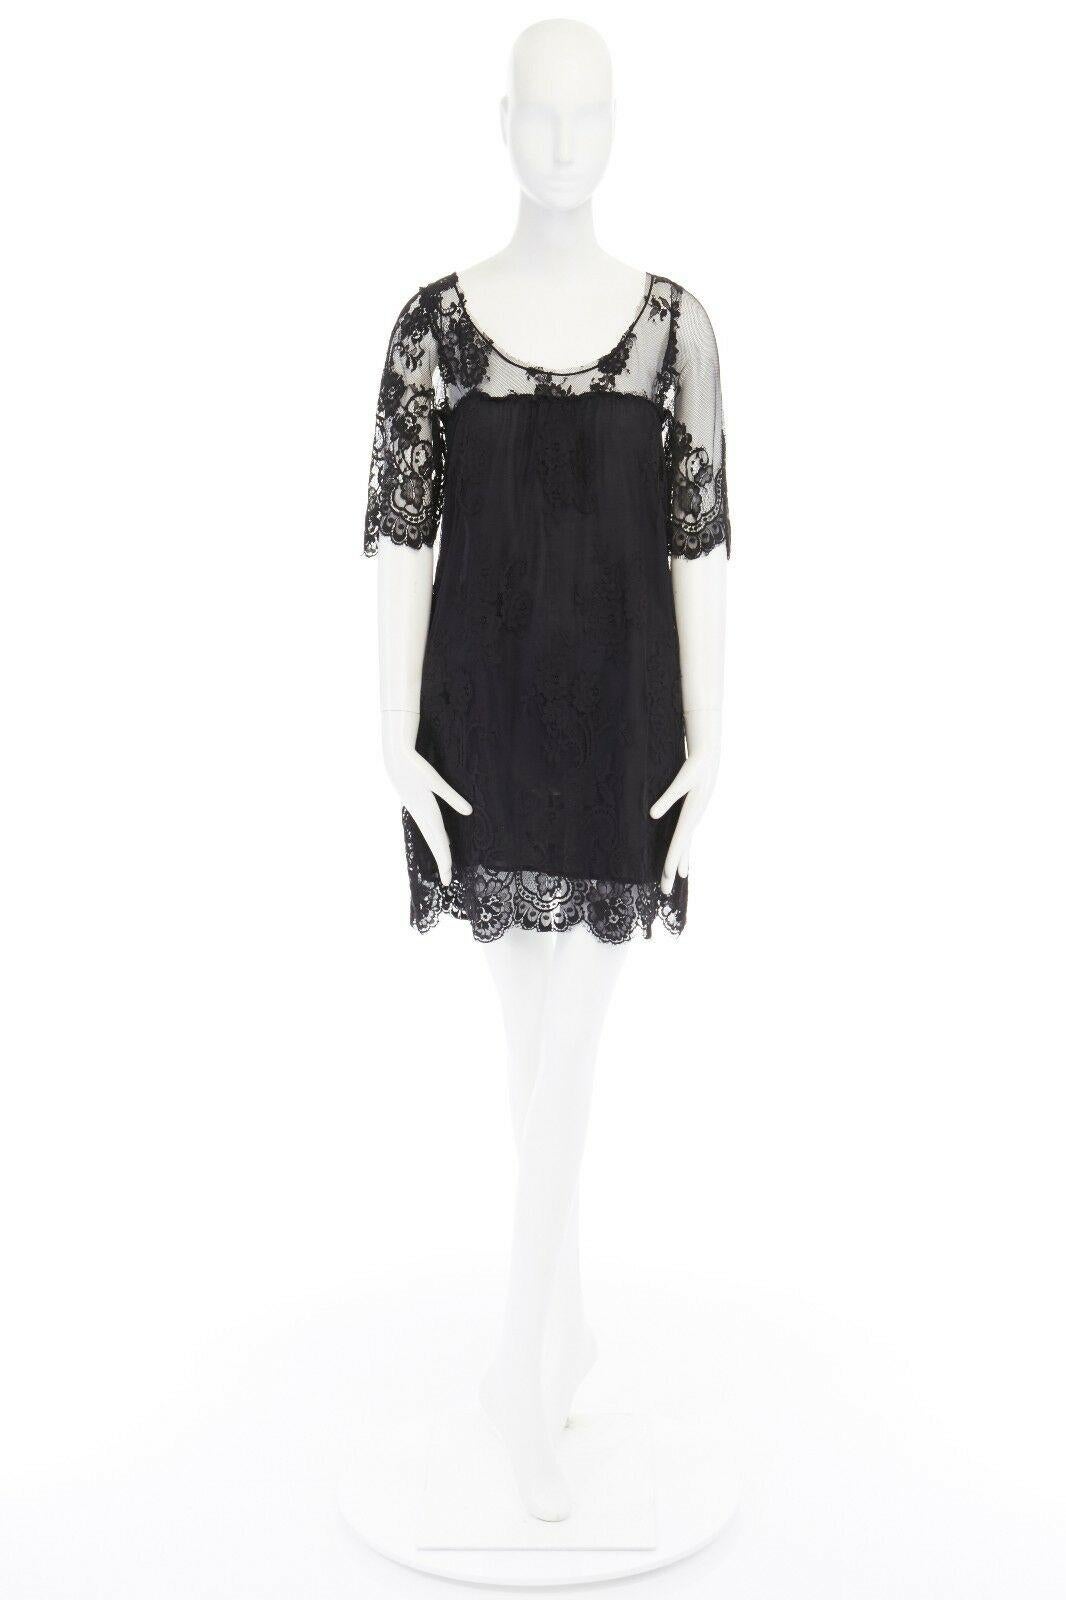 SIMONE BARBIERI TWIN-SET black floral lace short sleeve lined mini dress M 
Reference: WEYN/A00043 
Brand: Simona Barbieri 
Material: Cotton 
Color: Black 
Pattern: Other 

CONDITION: 
Condition: Excellent, this item was pre-owned and is in